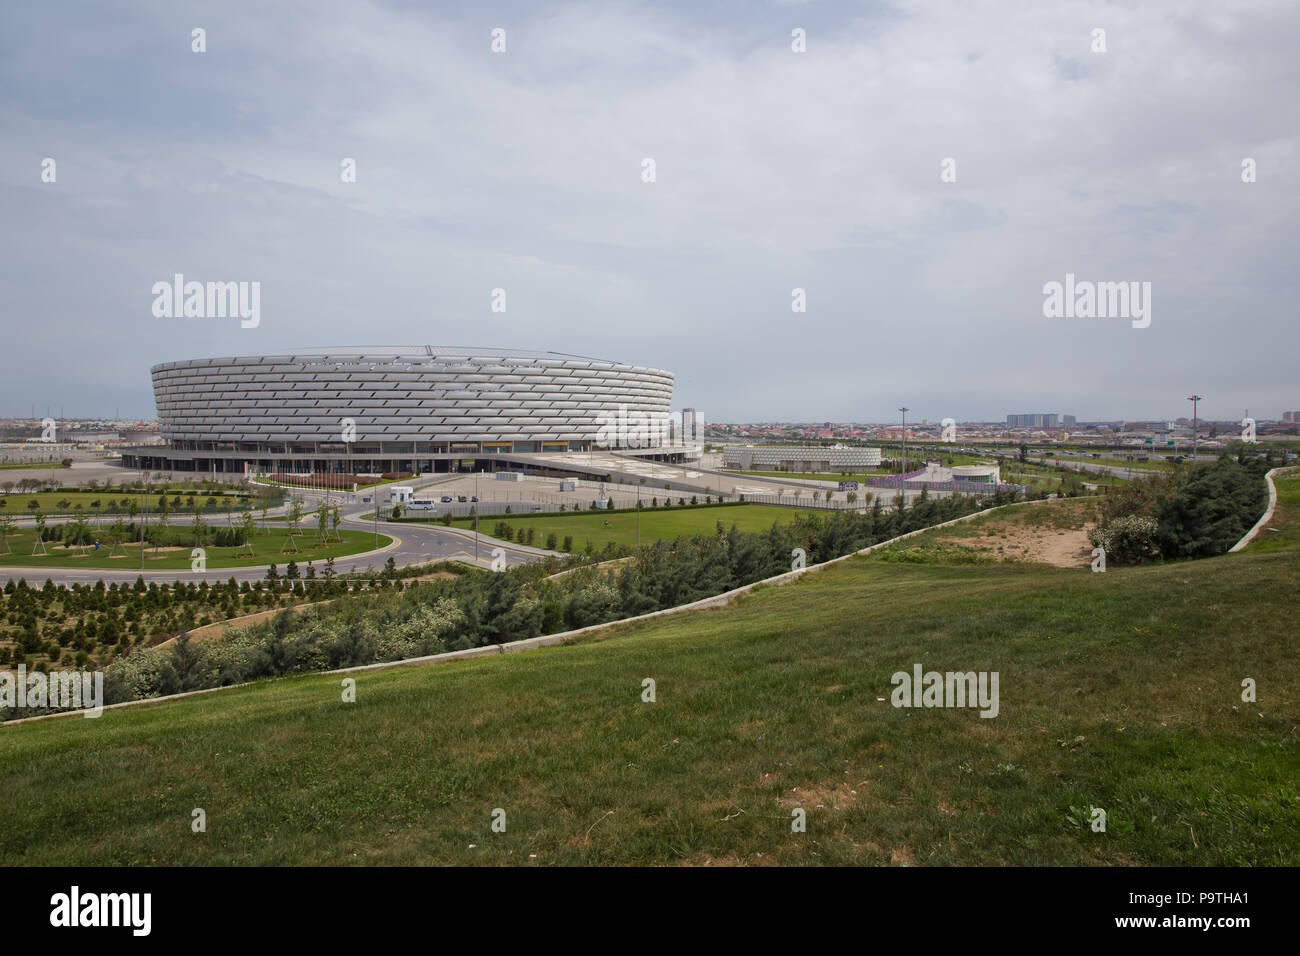 Construction of the 225,000-square-meter Stadium on a 650,000-square-meter site was completed in February 2015. The six-story, 65.7 meter structure ne Stock Photo